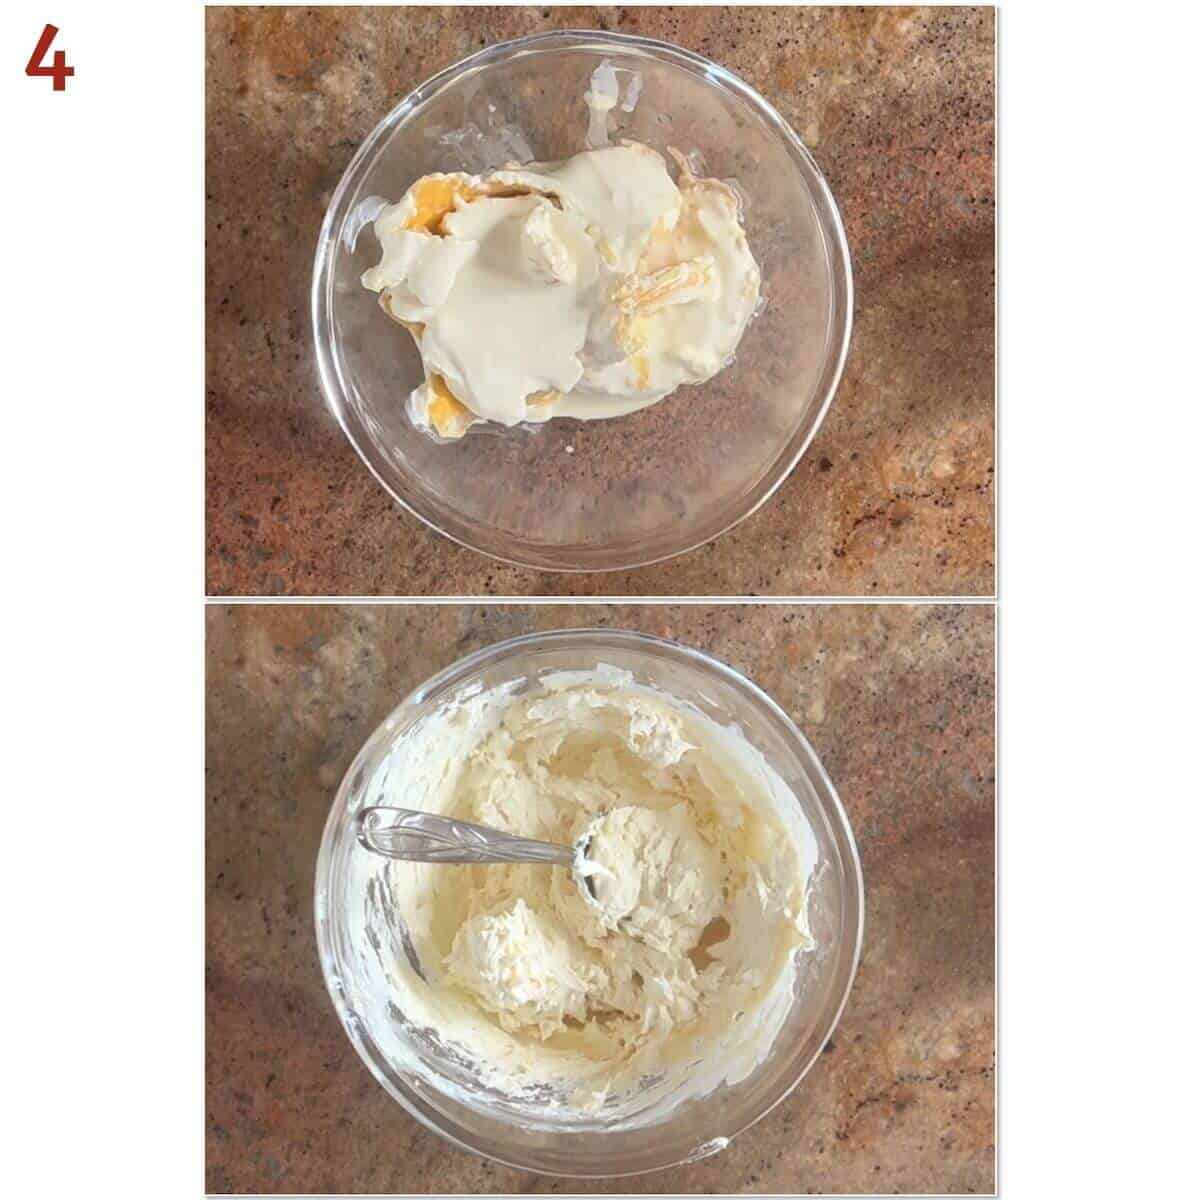 Collage of skimmed clotted cream and stirred smooth with a spoon.